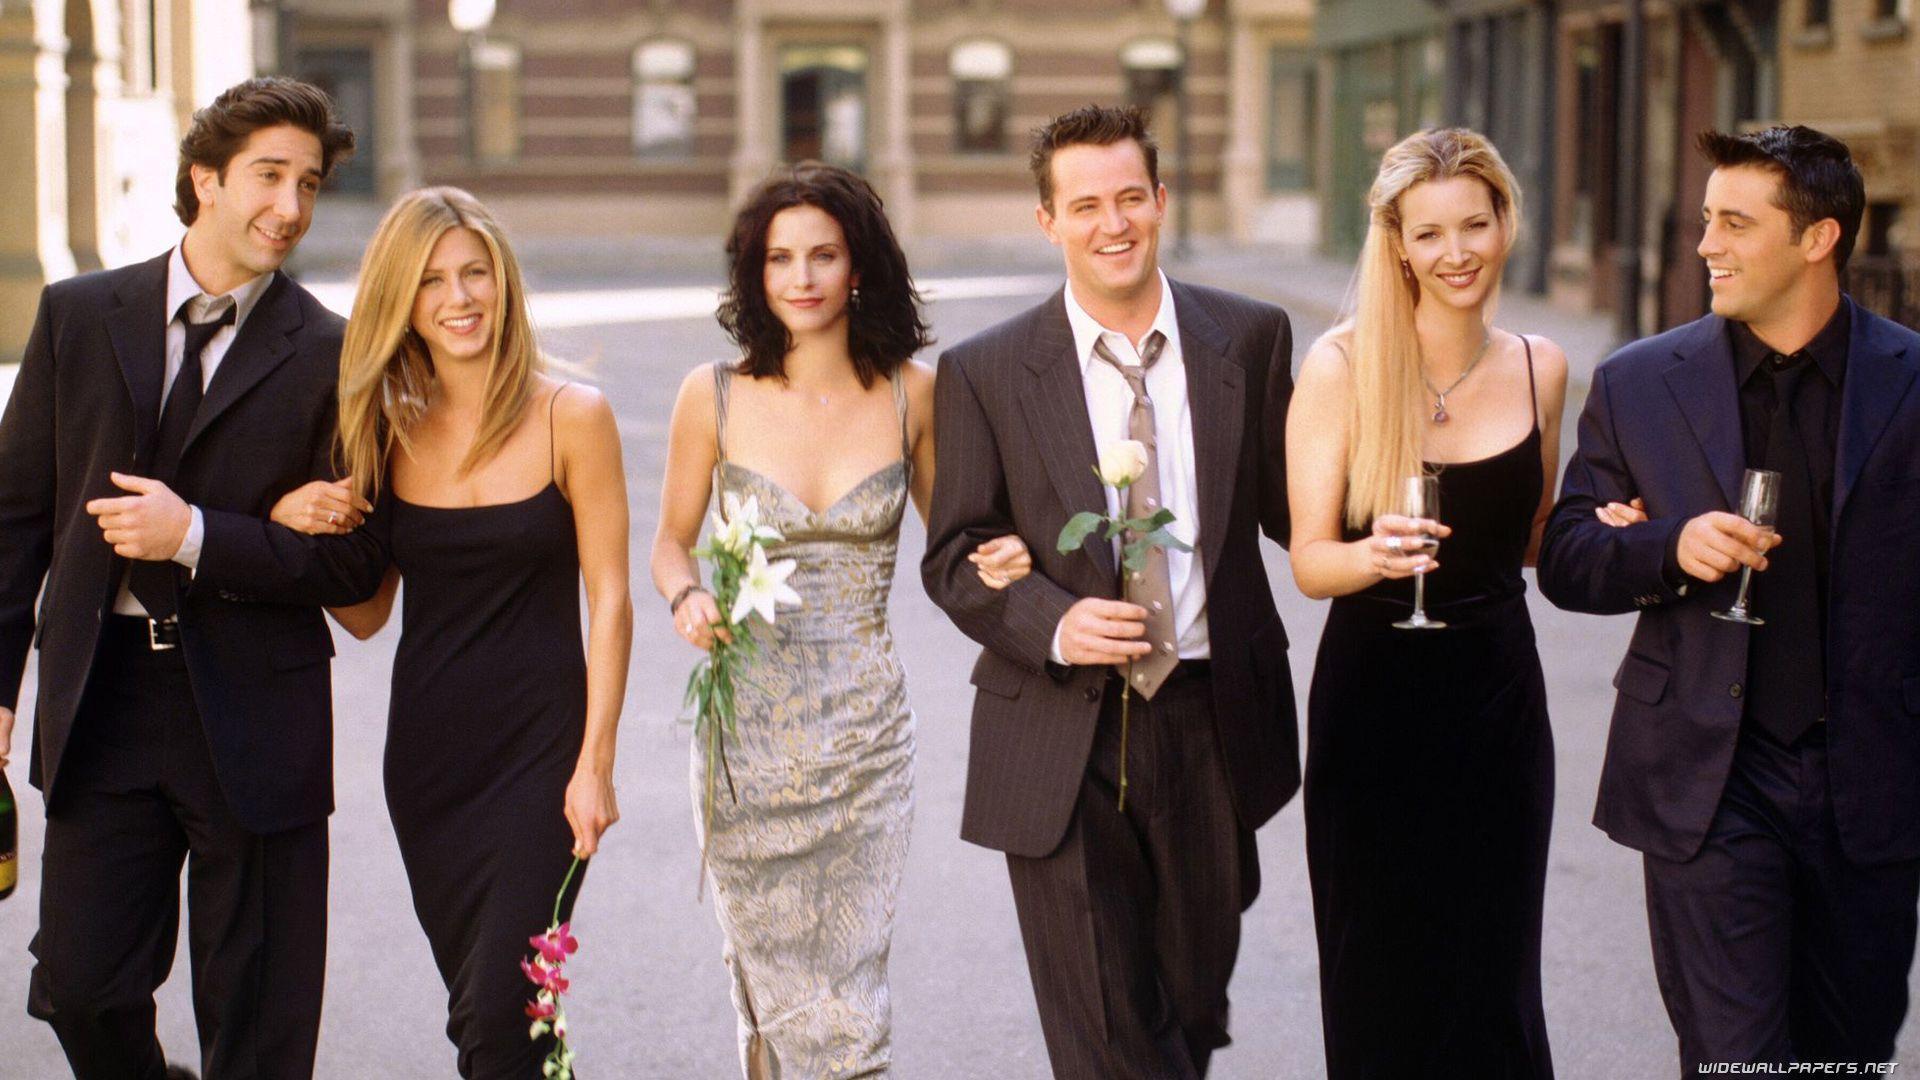 Wallpaper For – Friends Tv Series Cover Photo